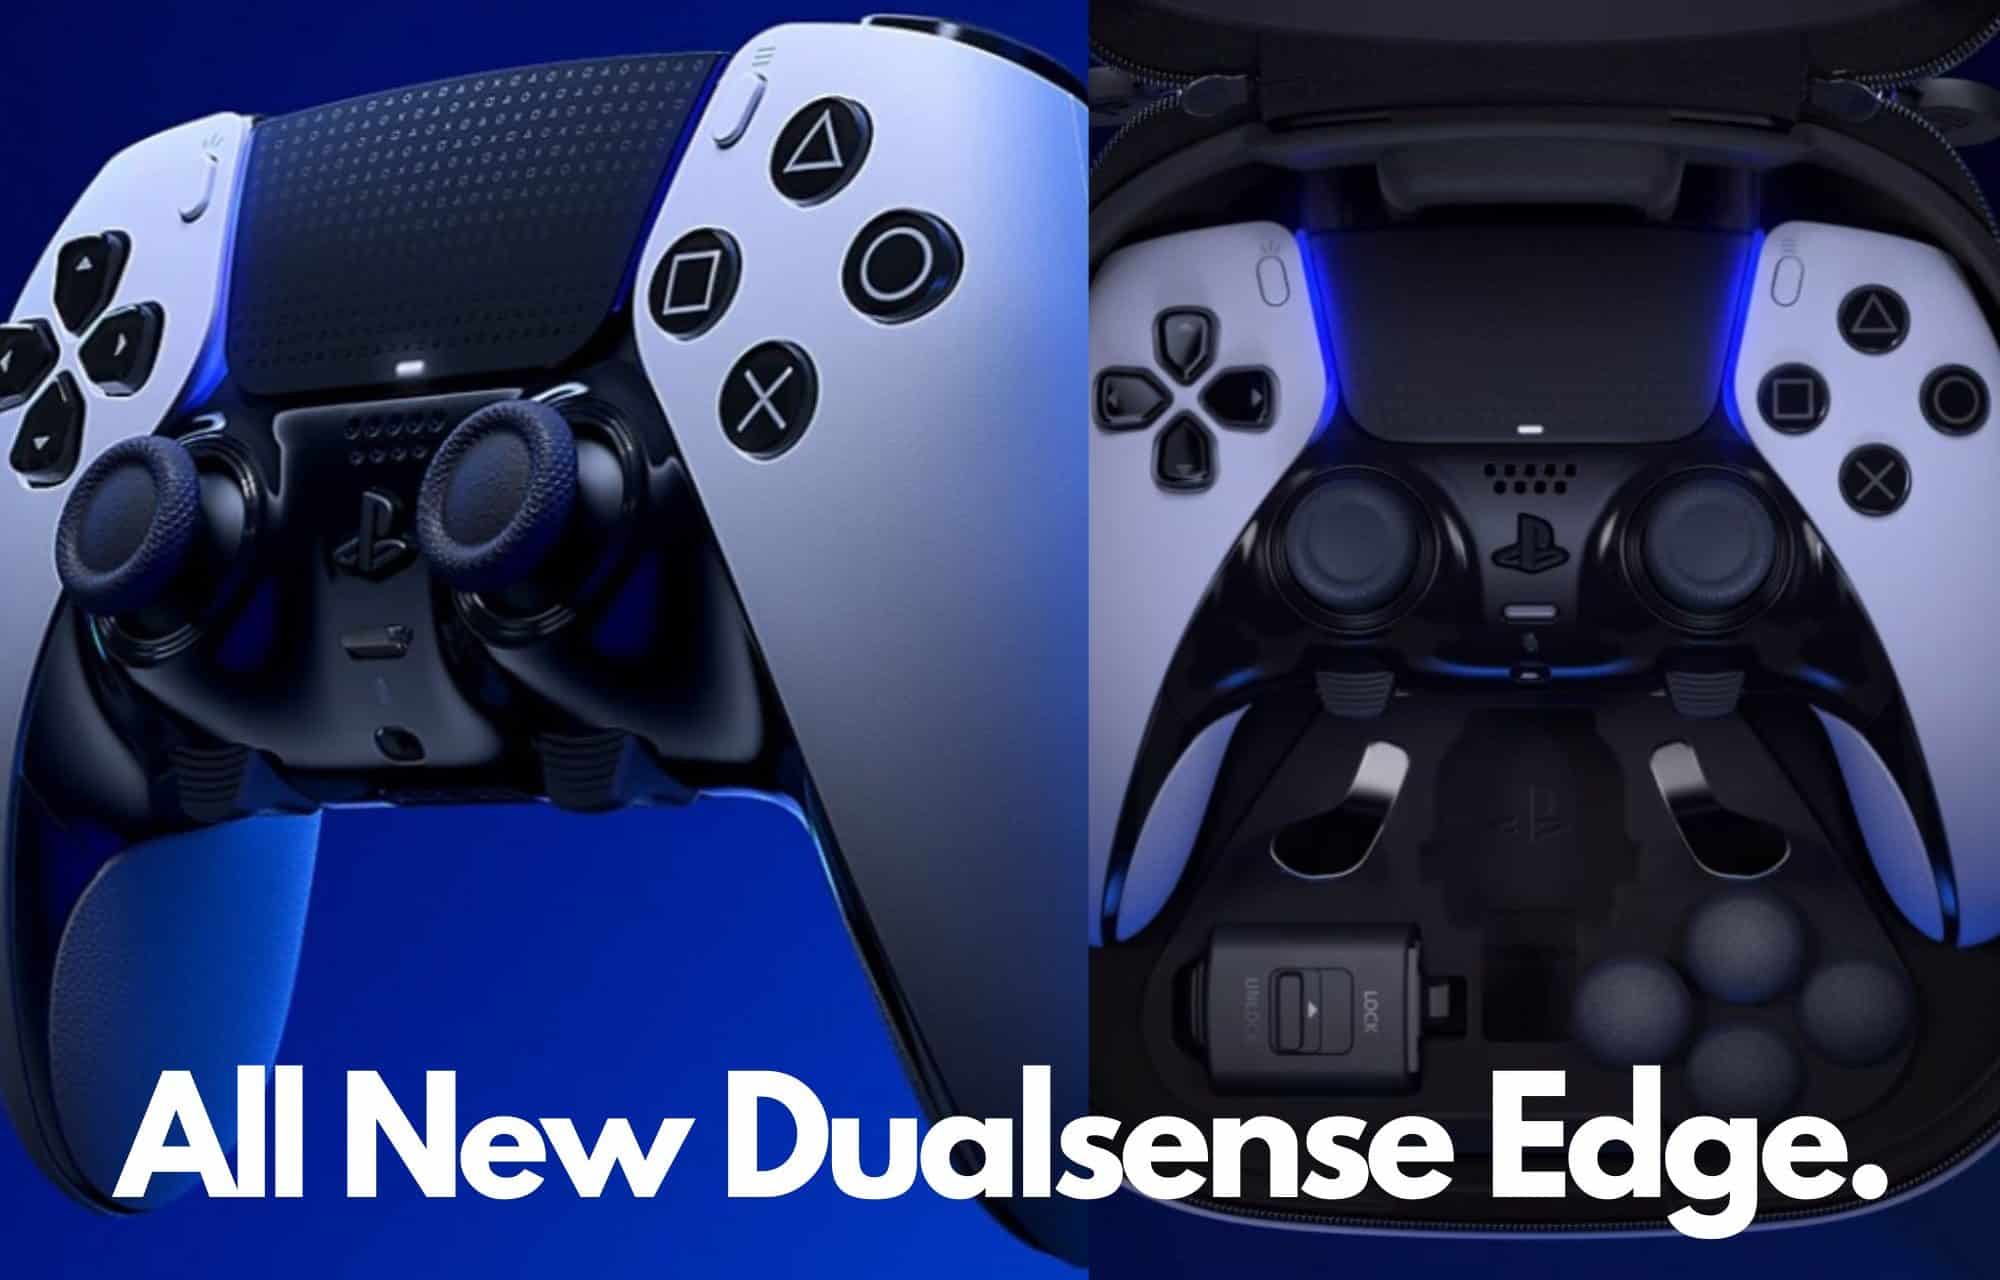 Dualsense Edge Release Date, Price & How to order